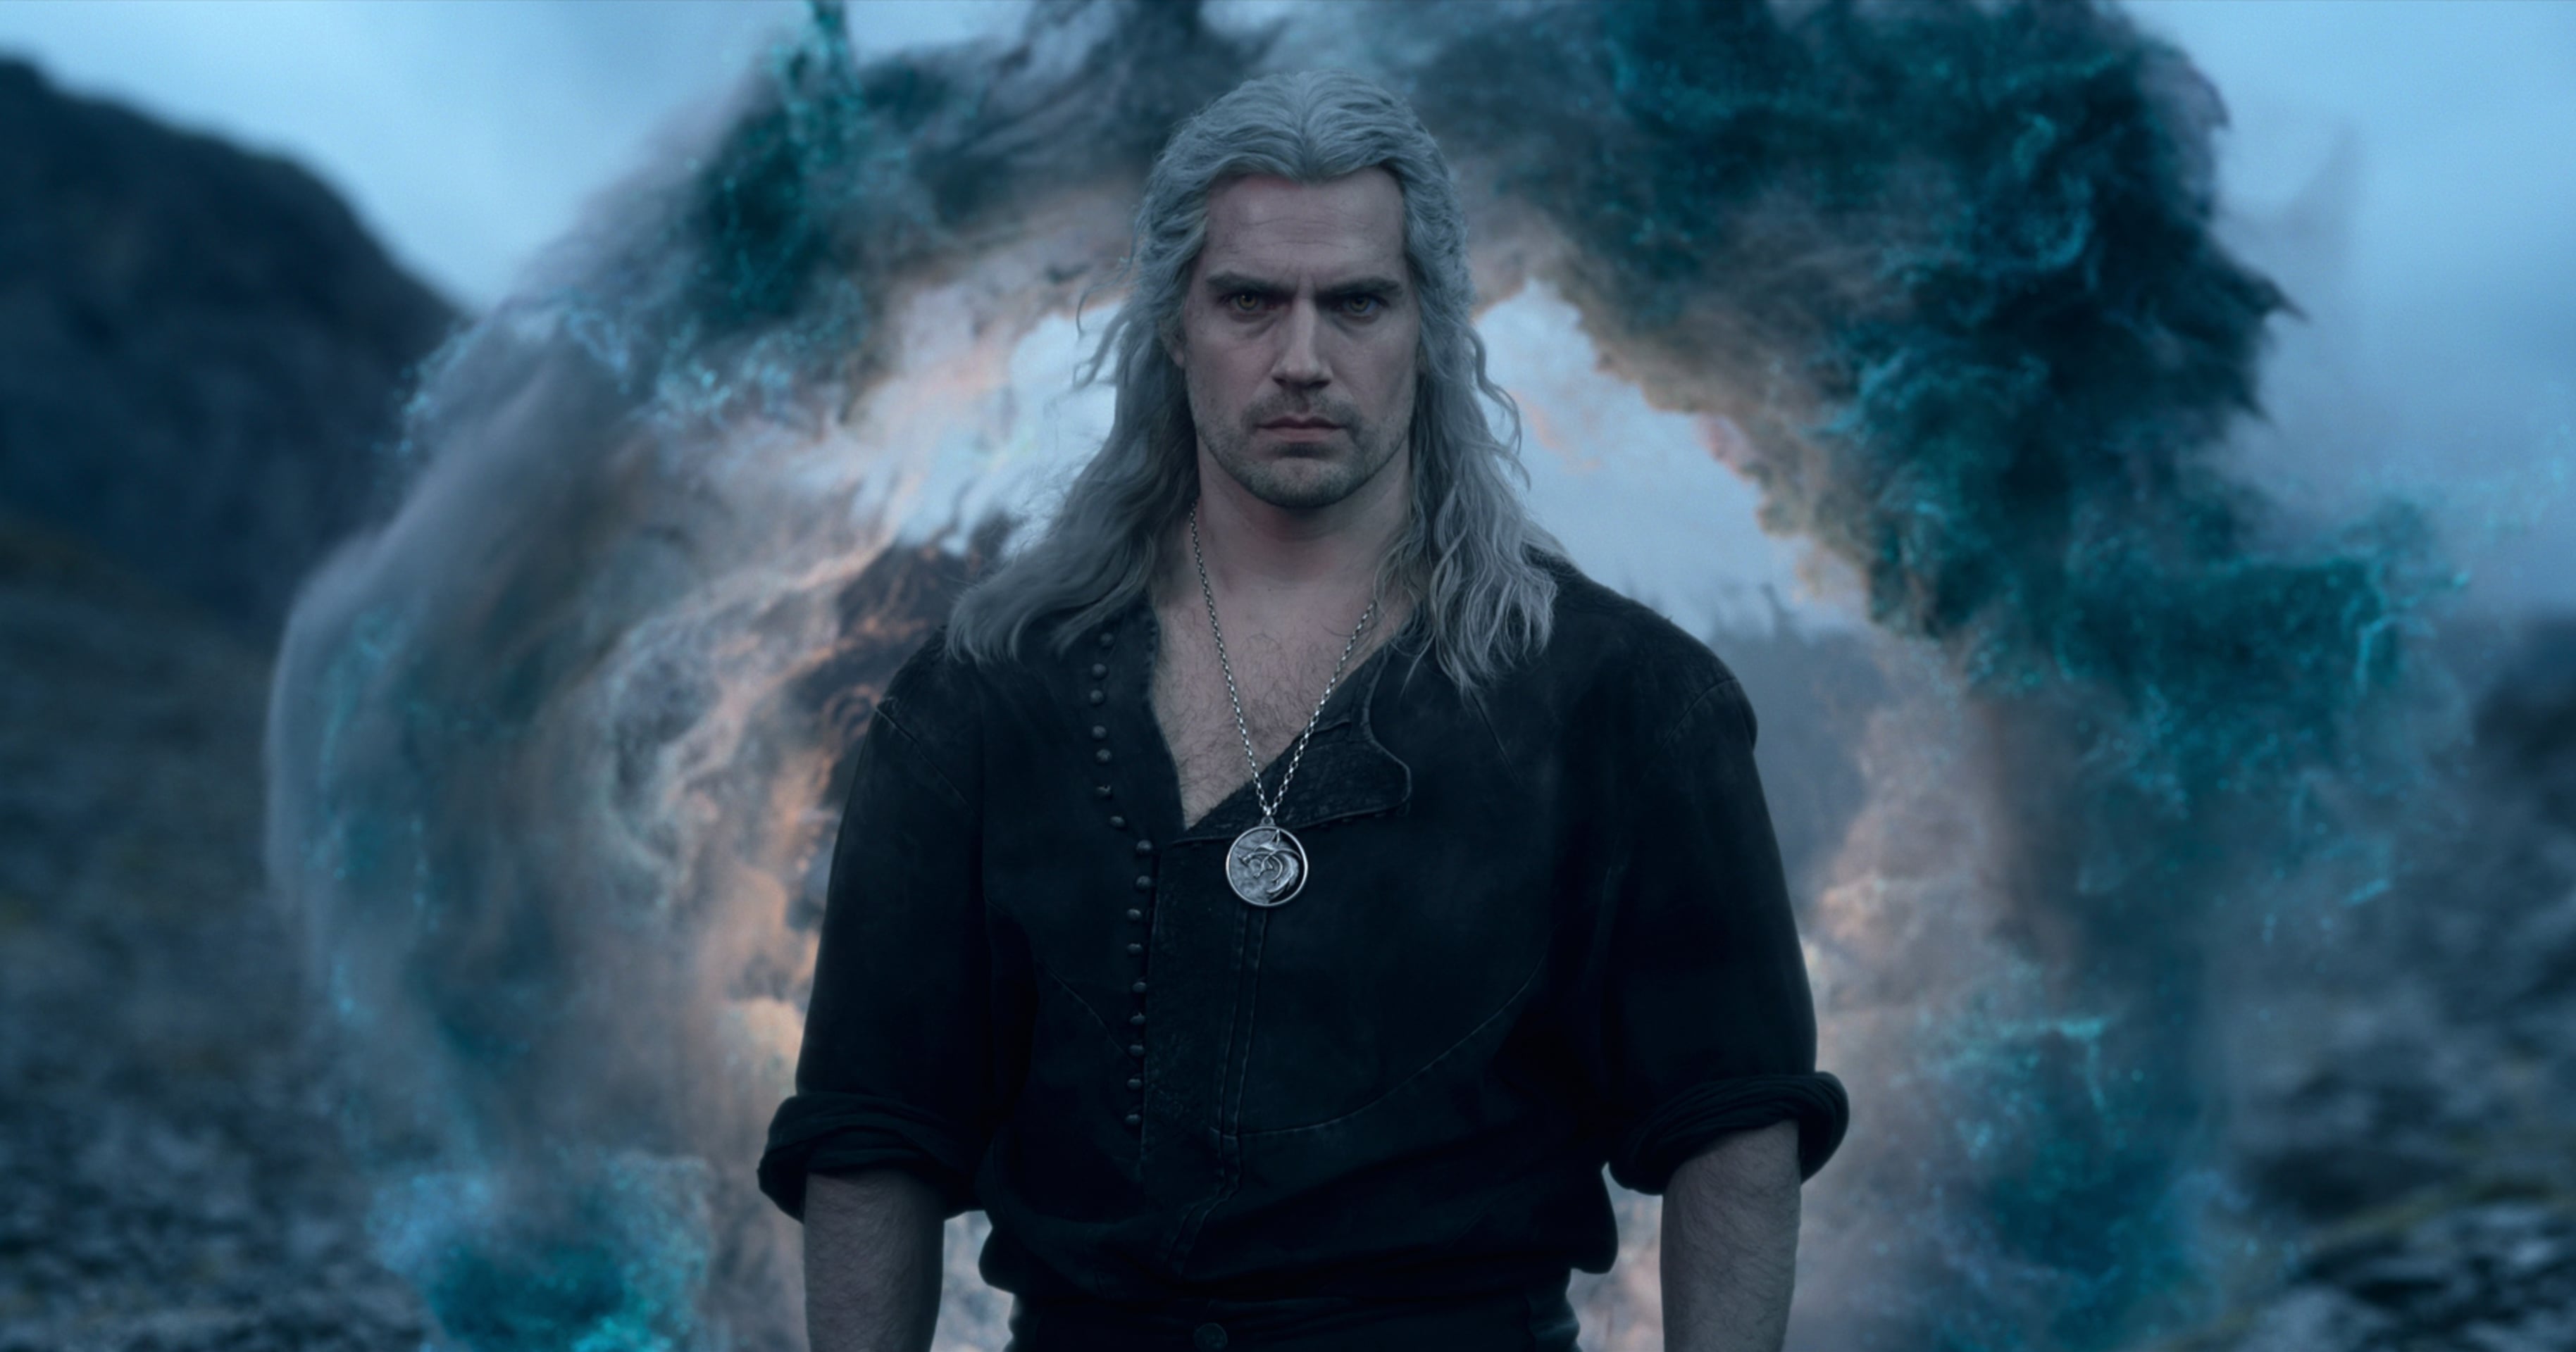 Where to Start With The Witcher Games if You Loved the Netflix Show -  POPSUGAR Australia